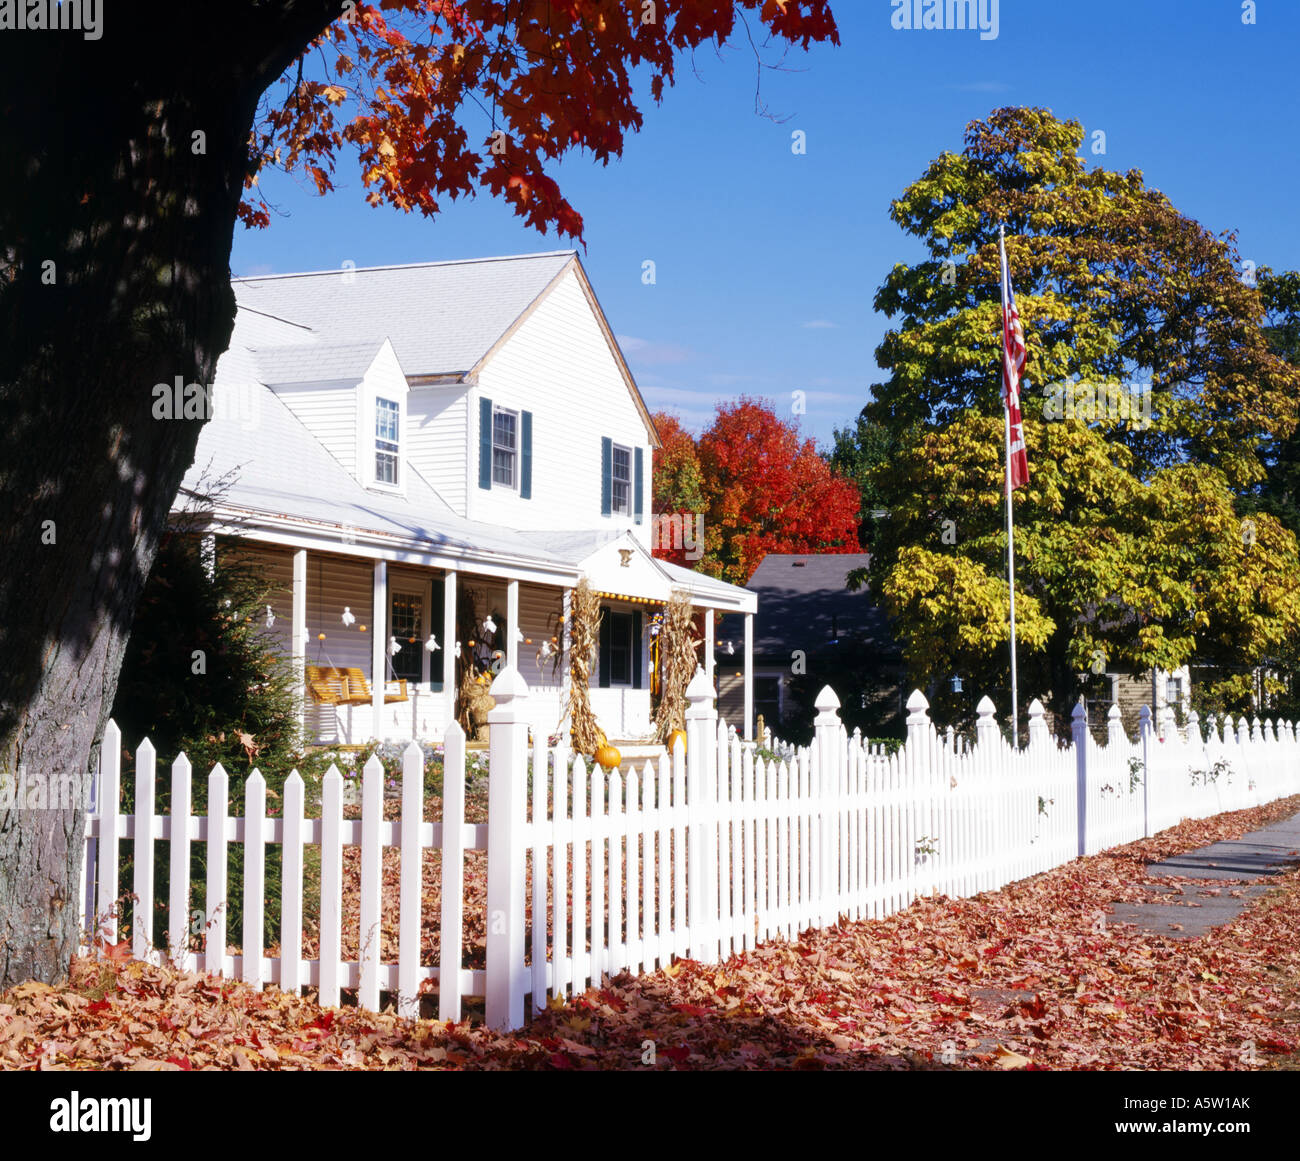 traditional white clapboard house surrounded by autumn foliage concord massachusetts usa Stock Photo